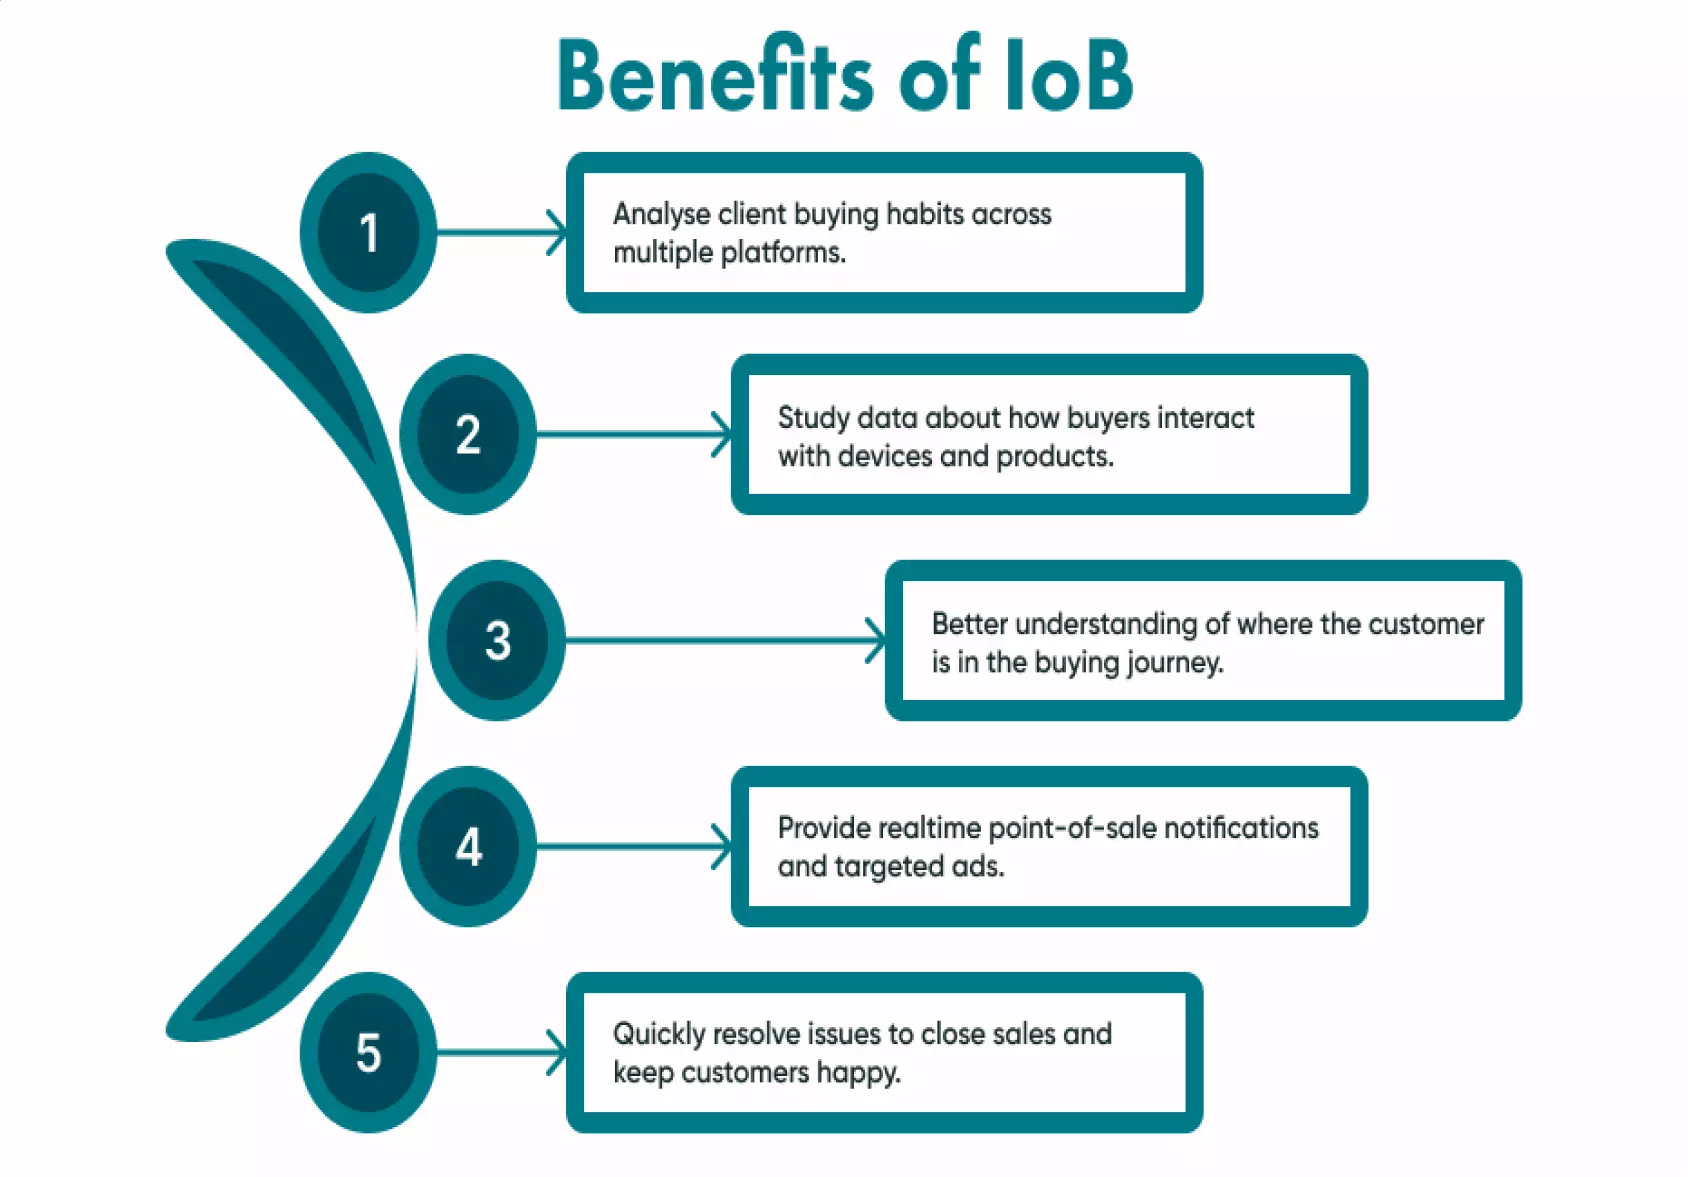 Benefits of the IoB on our lives and businesses.